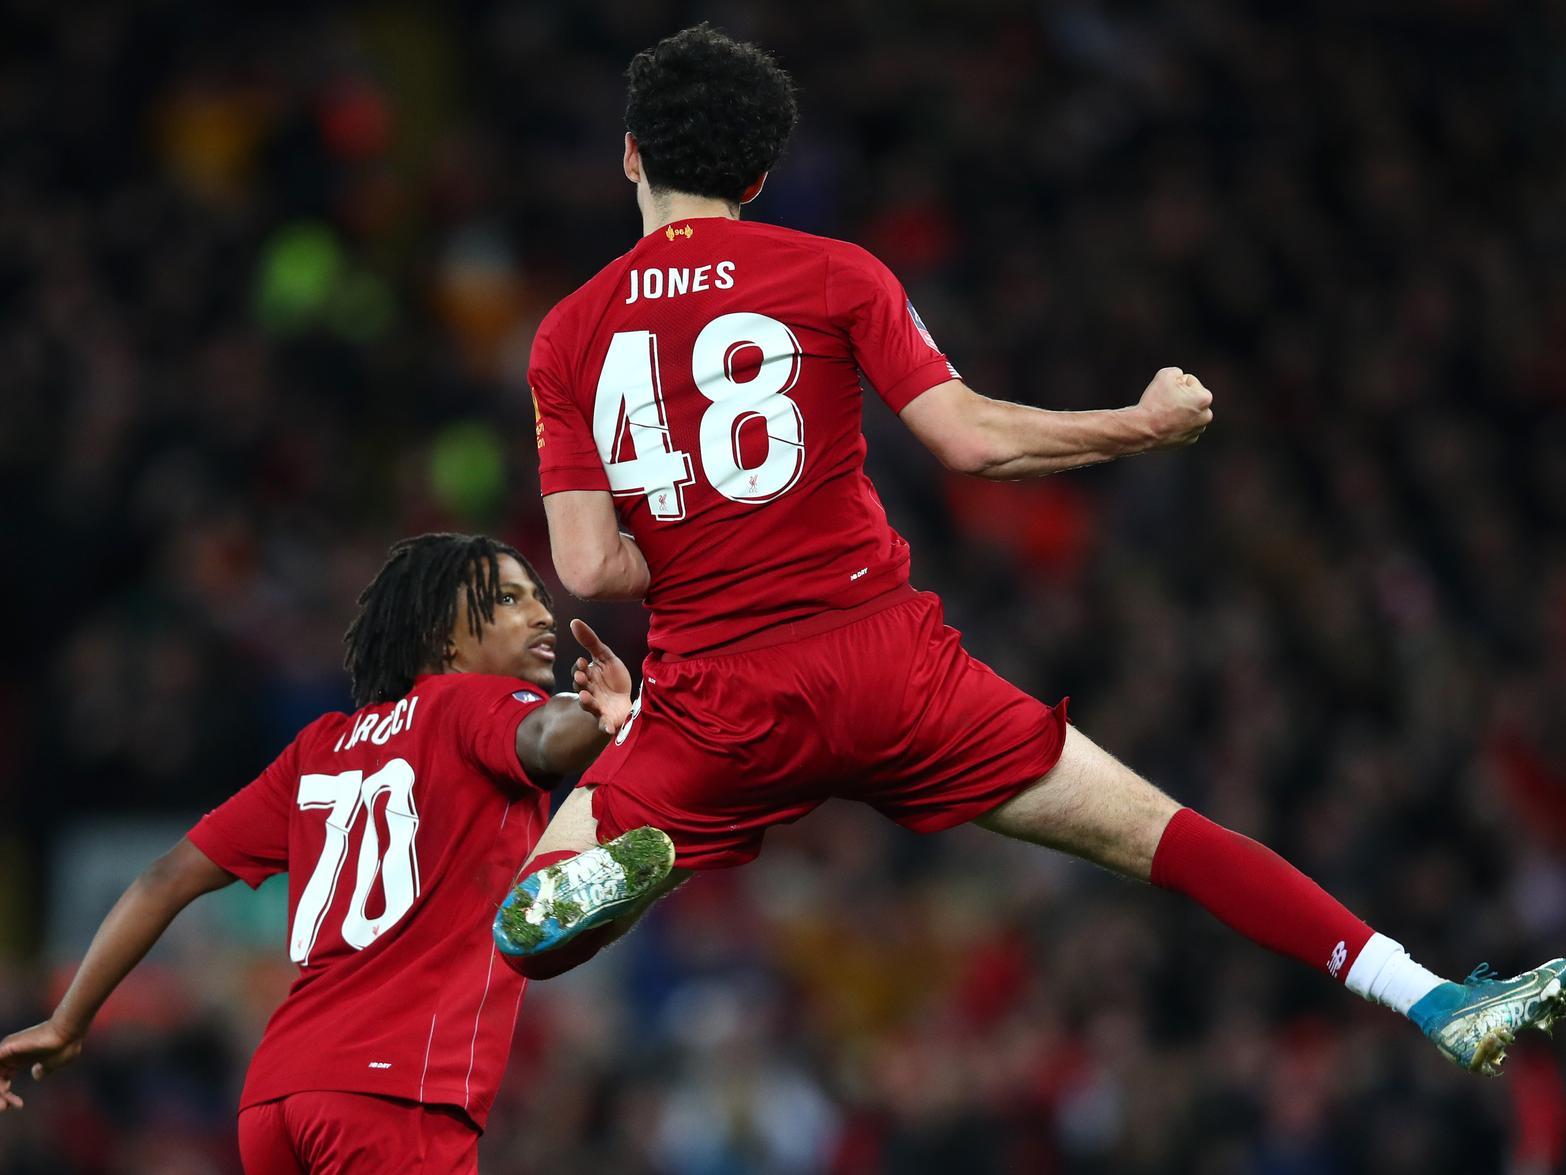 Leeds United are said to have made a formal approach to sign Liverpool starlet Curtis Jones on loan, but his stunning FA Cup goal against Everton may see the Reds look to hang onto him. (Football Insider)